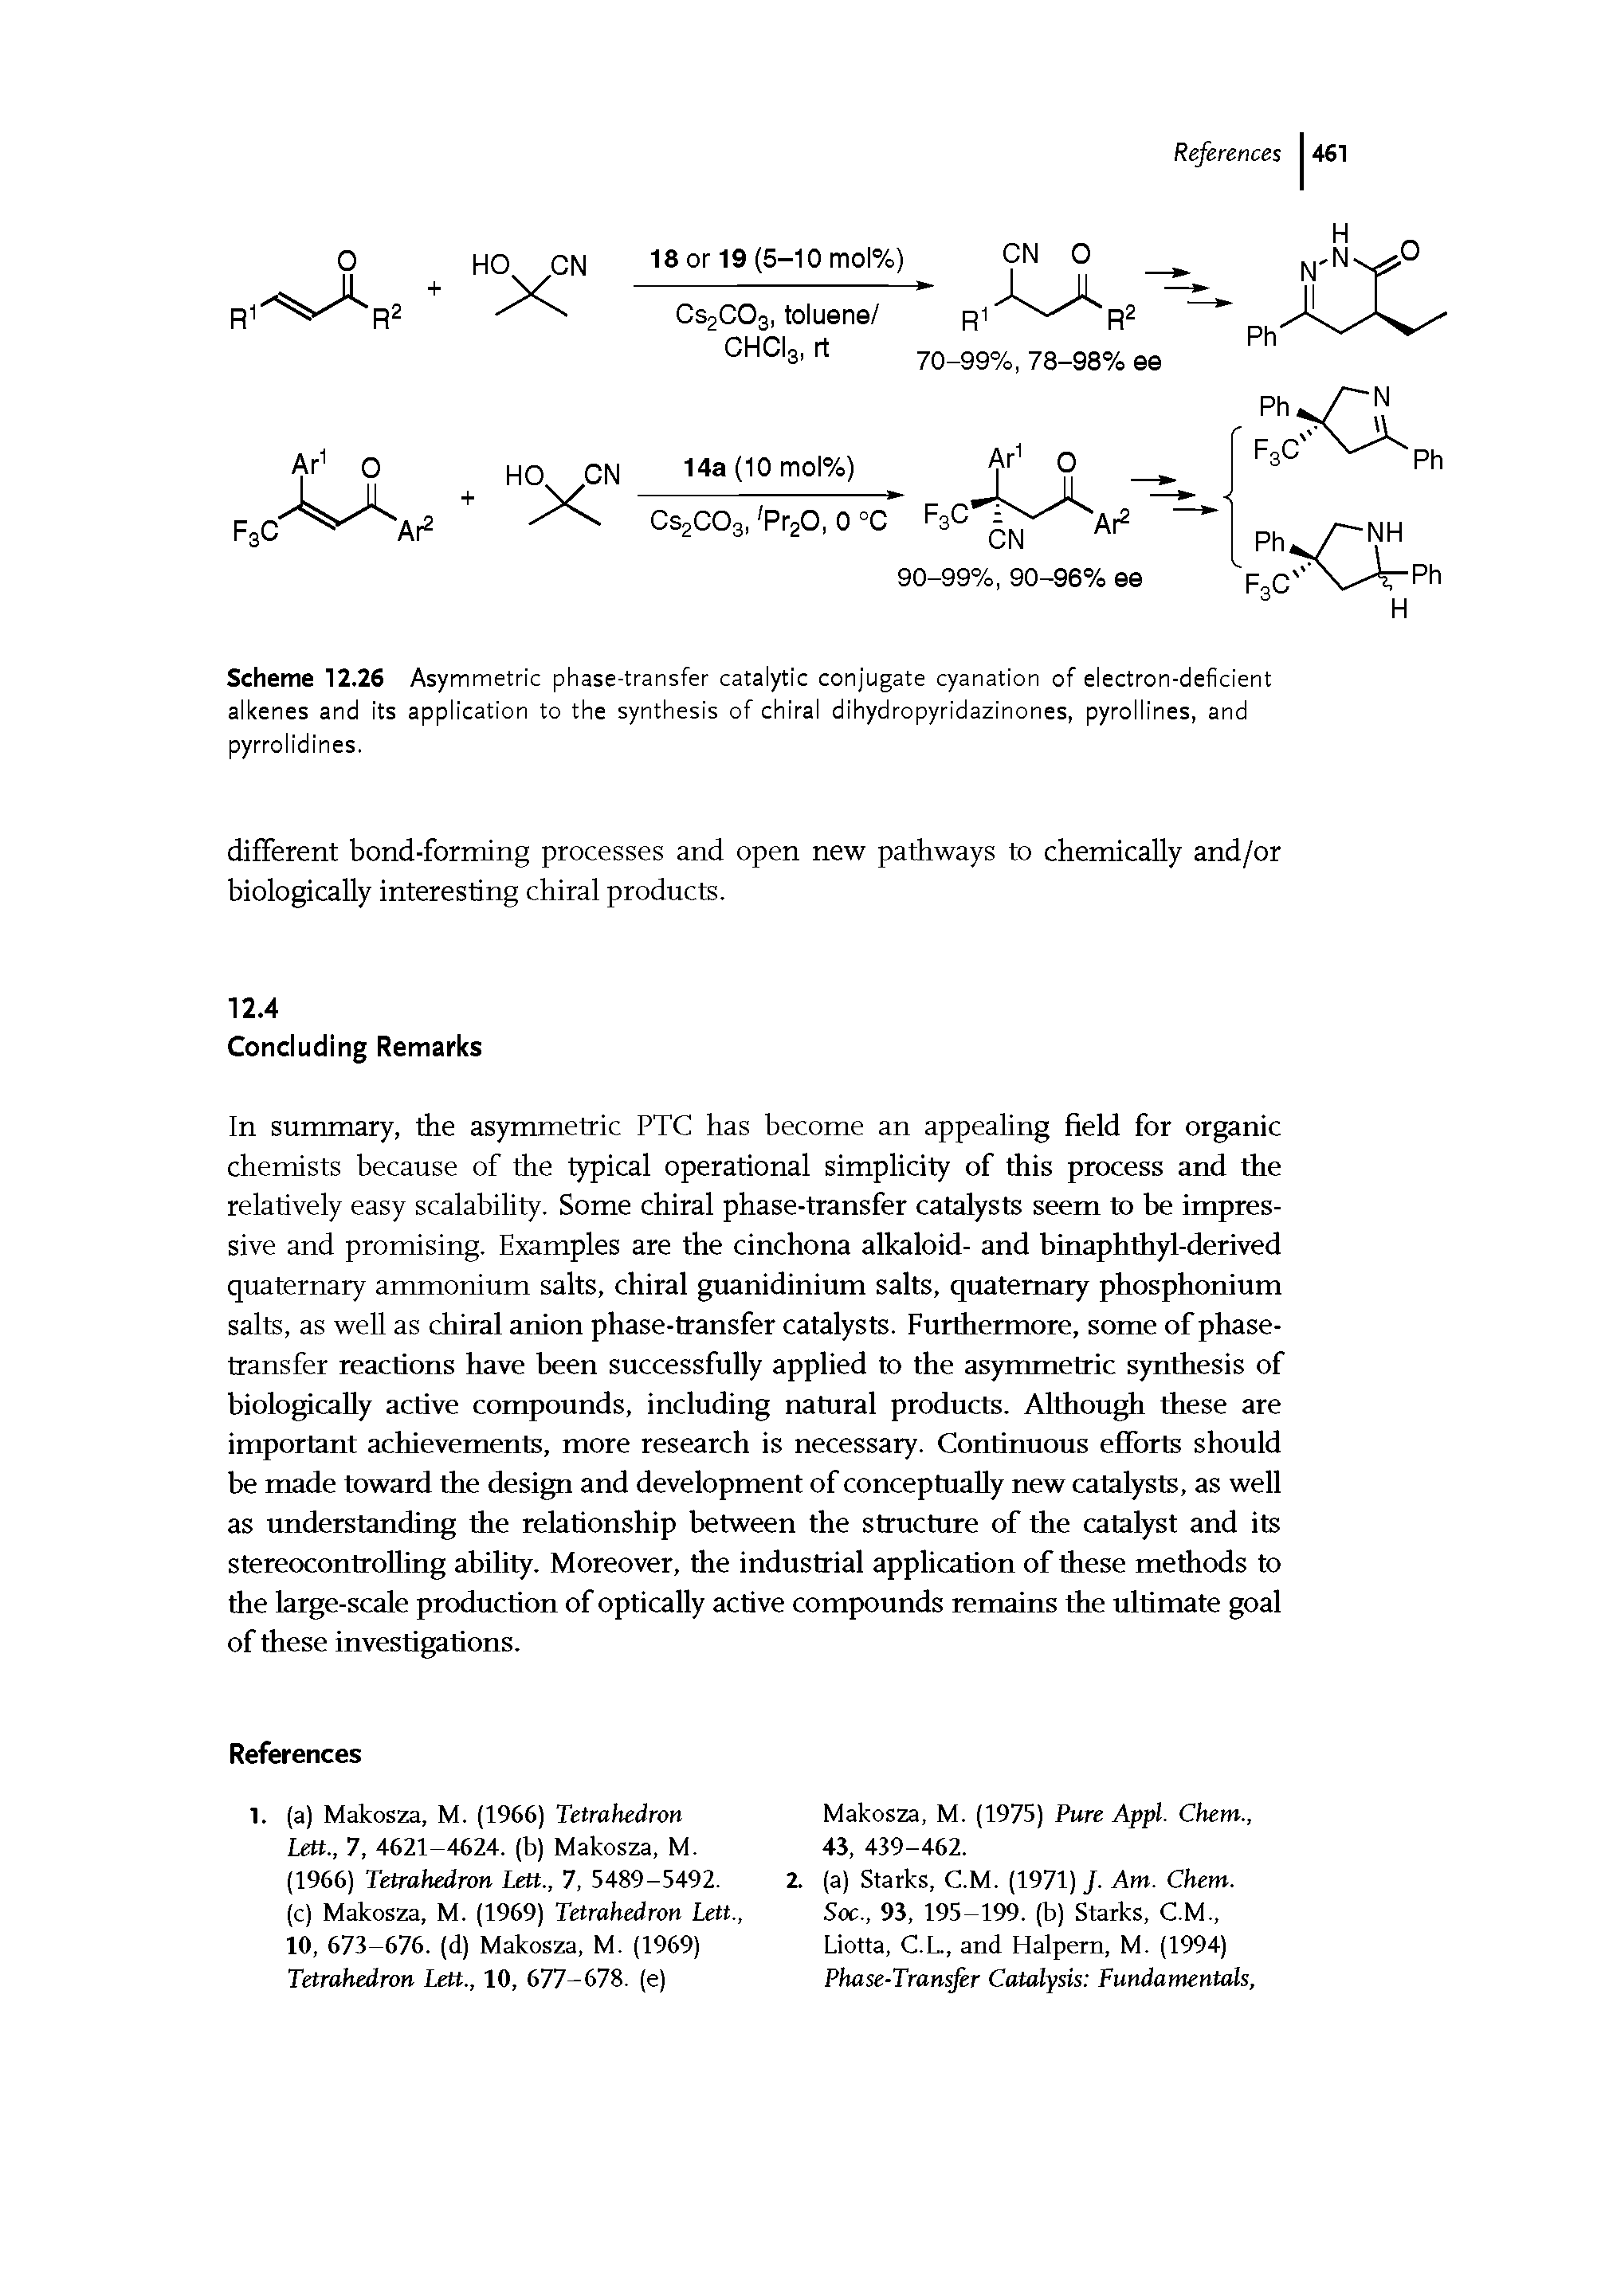 Scheme 12.26 Asymmetric phase-transfer catalytic conjugate cyanation of electron-deficient alkenes and its application to the synthesis of chiral dihydropyridazinones, pyrollines, and pyrrolidines.